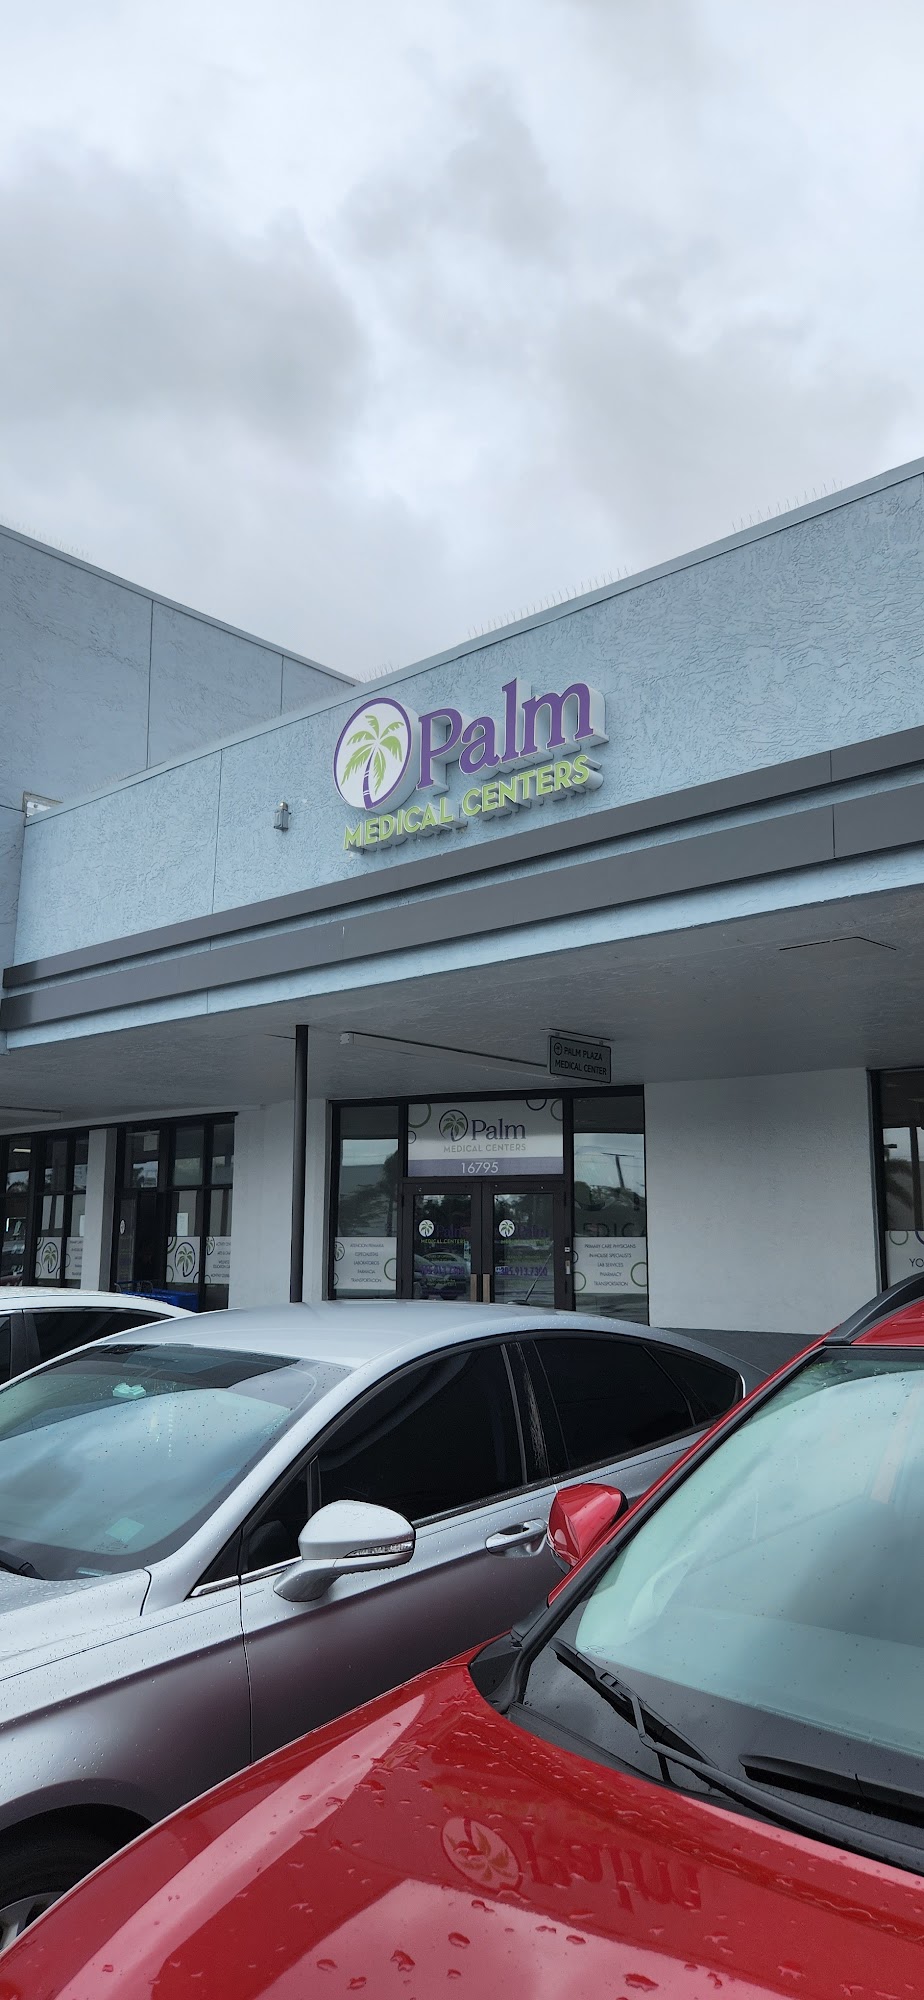 Palm Medical Centers - Miami Lakes